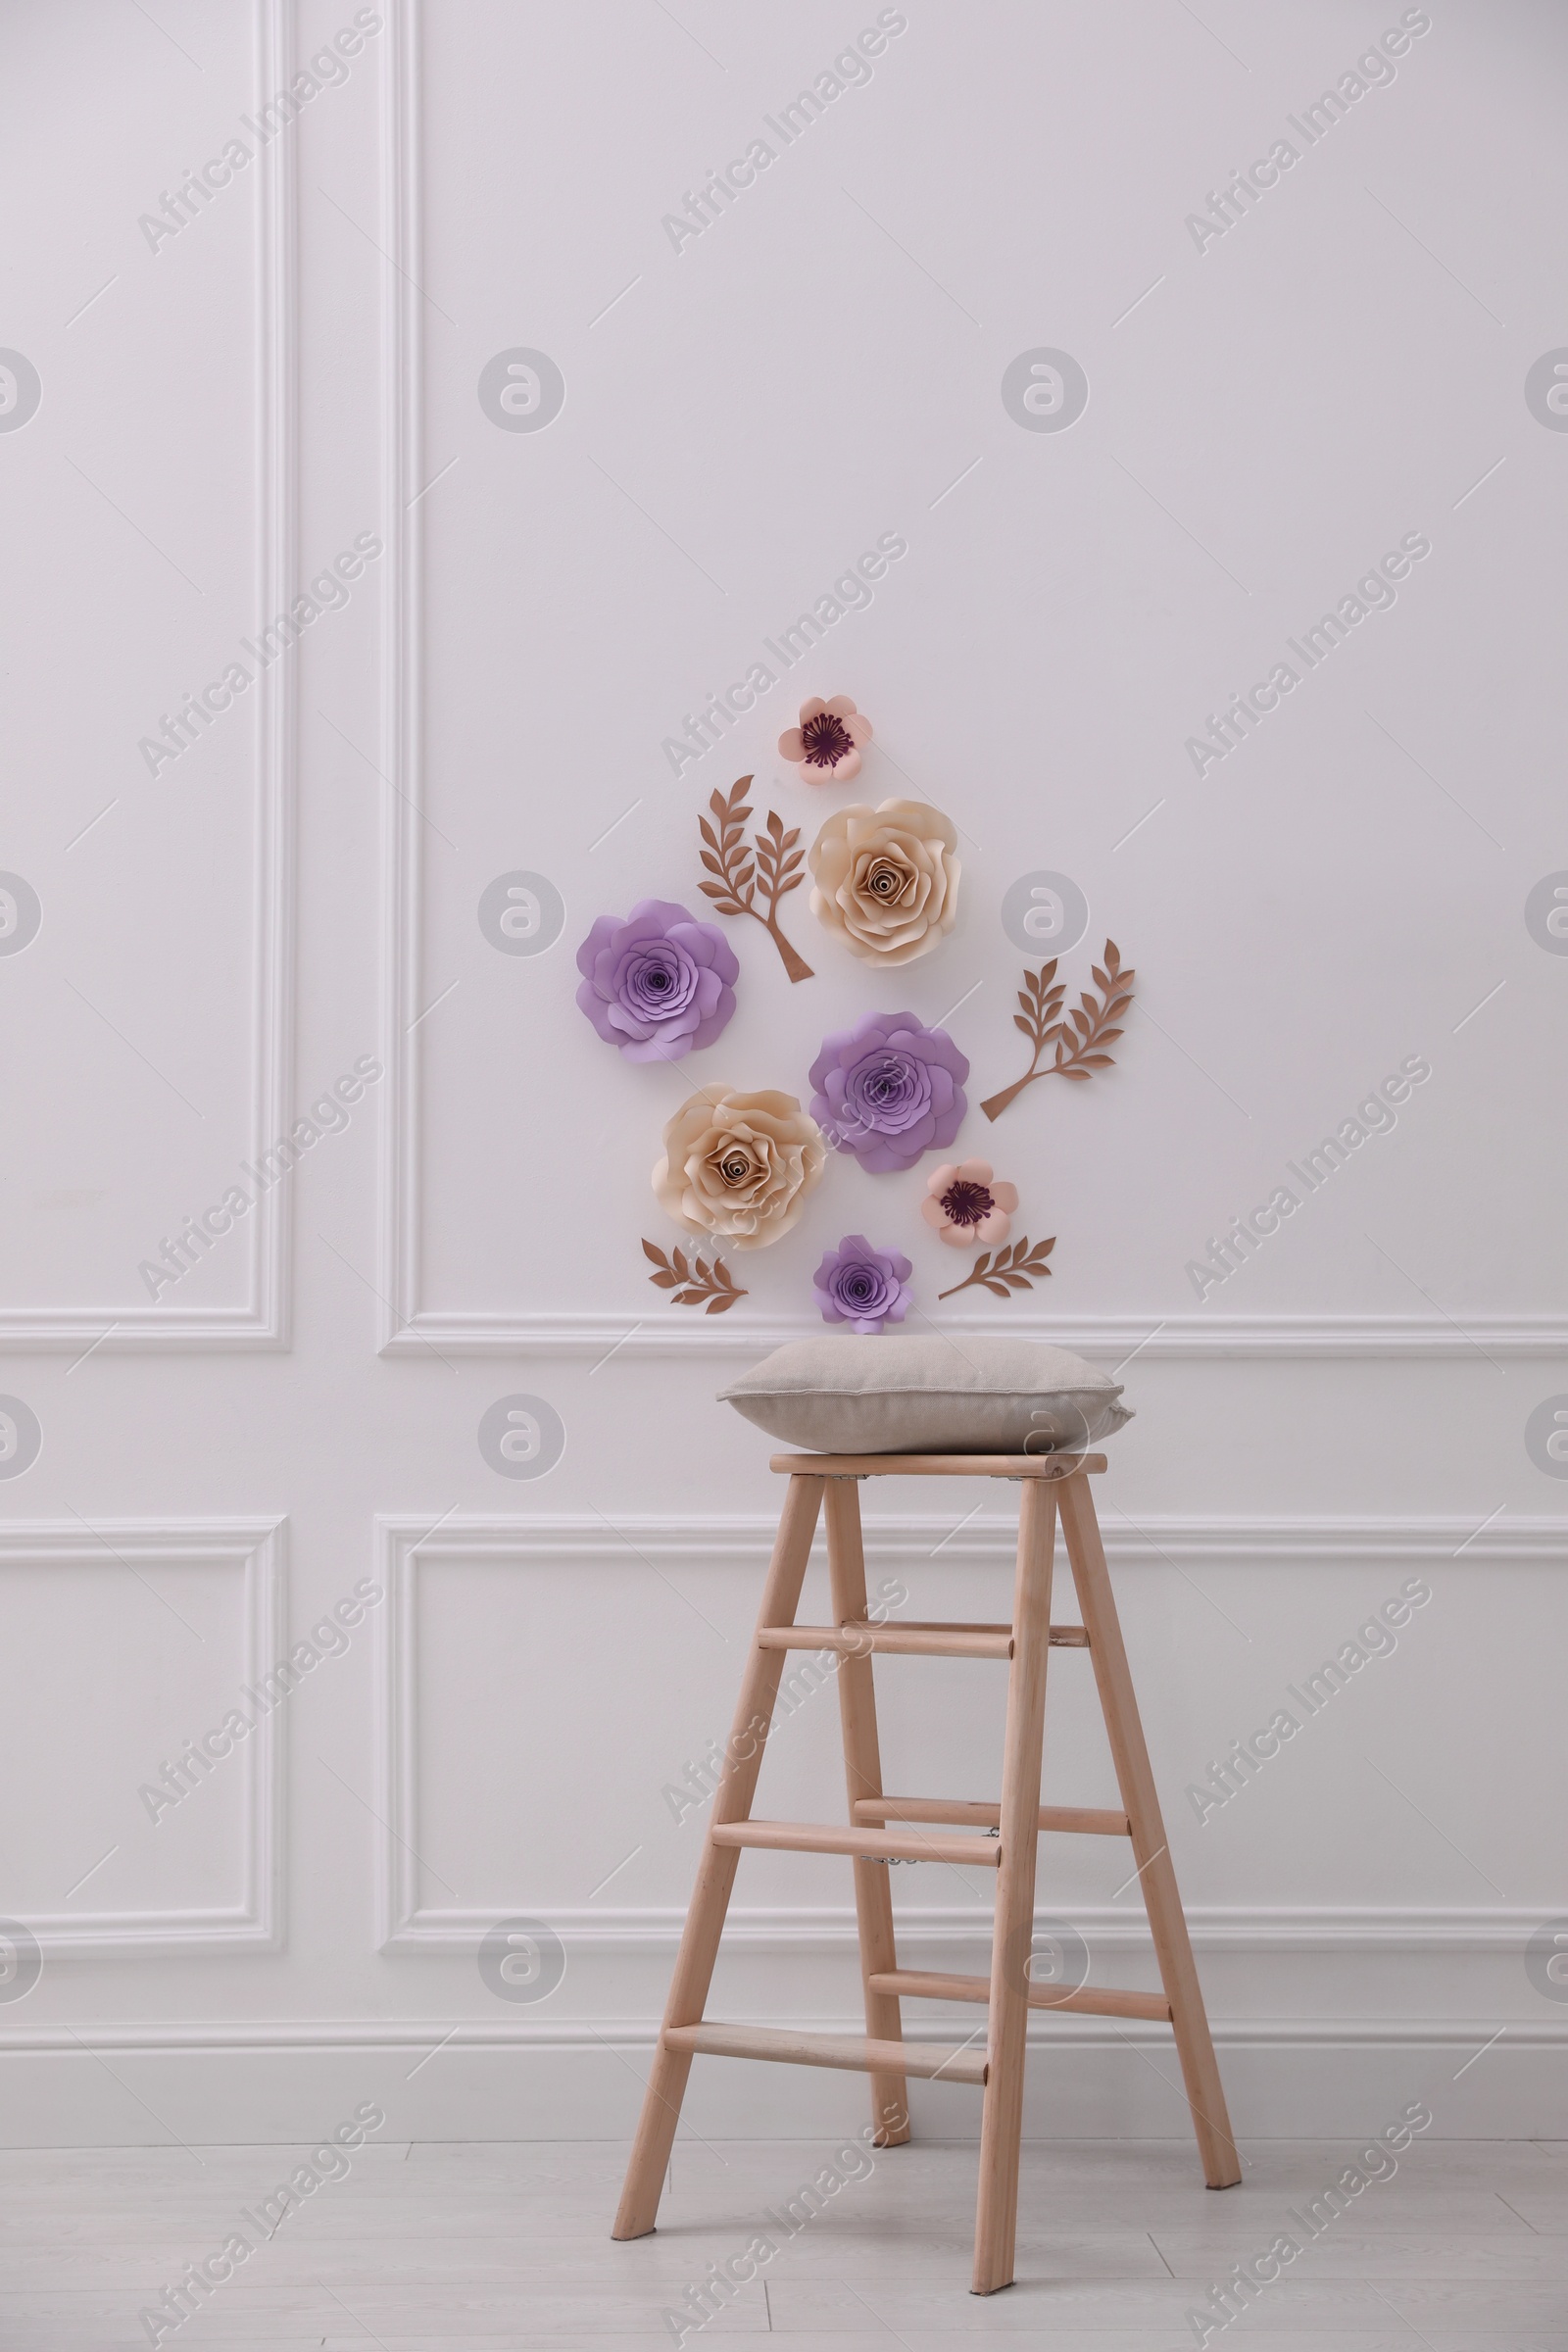 Photo of Stylish room interior with floral decor and wooden stand